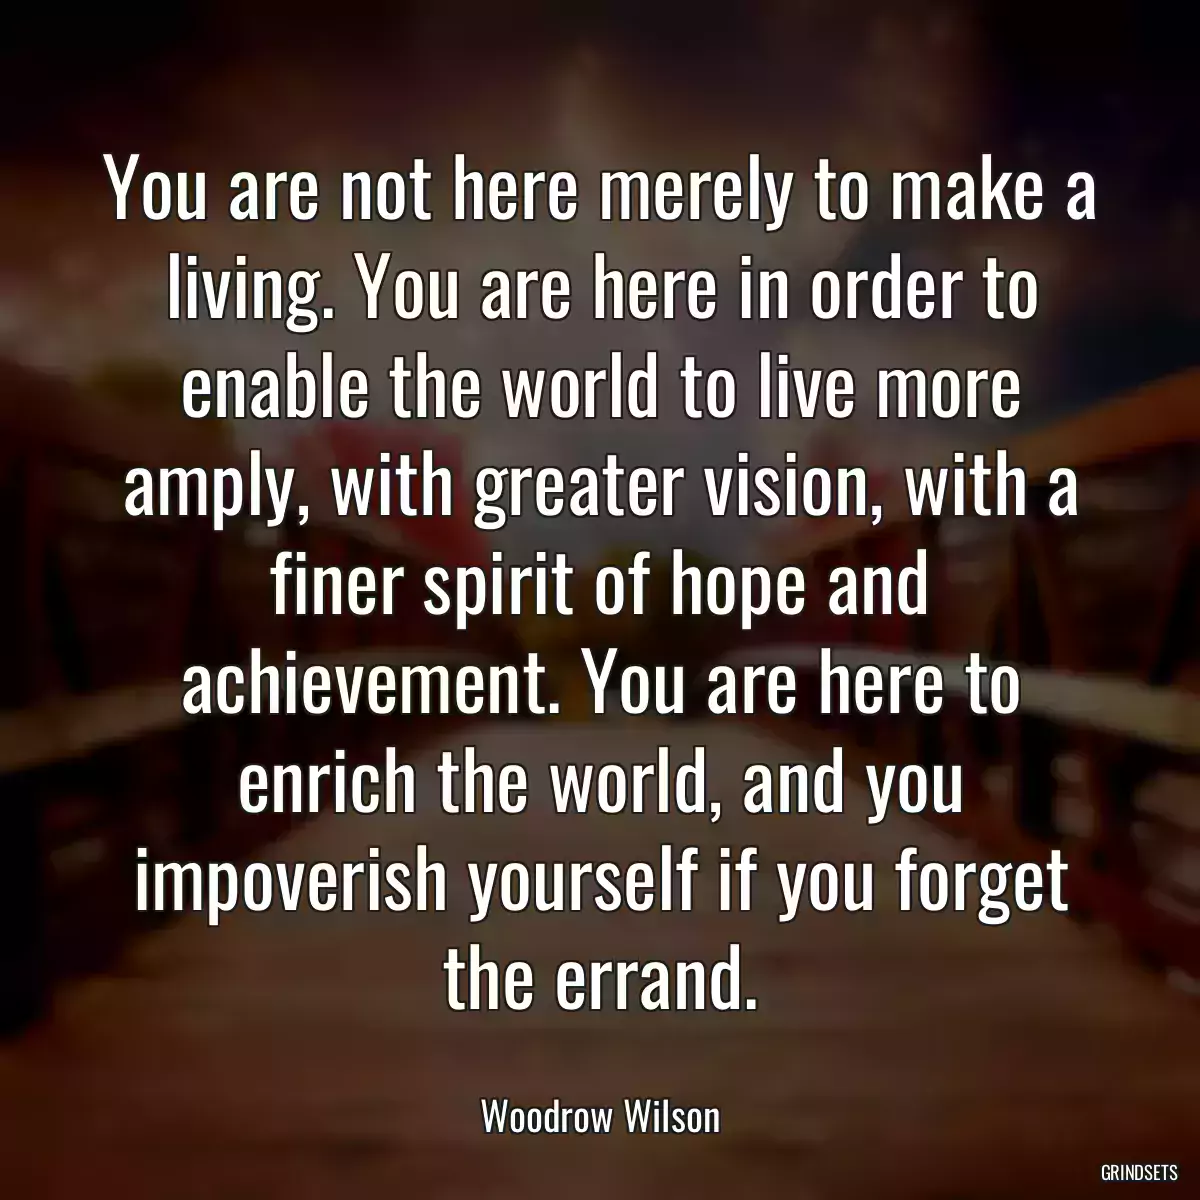 You are not here merely to make a living. You are here in order to enable the world to live more amply, with greater vision, with a finer spirit of hope and achievement. You are here to enrich the world, and you impoverish yourself if you forget the errand.